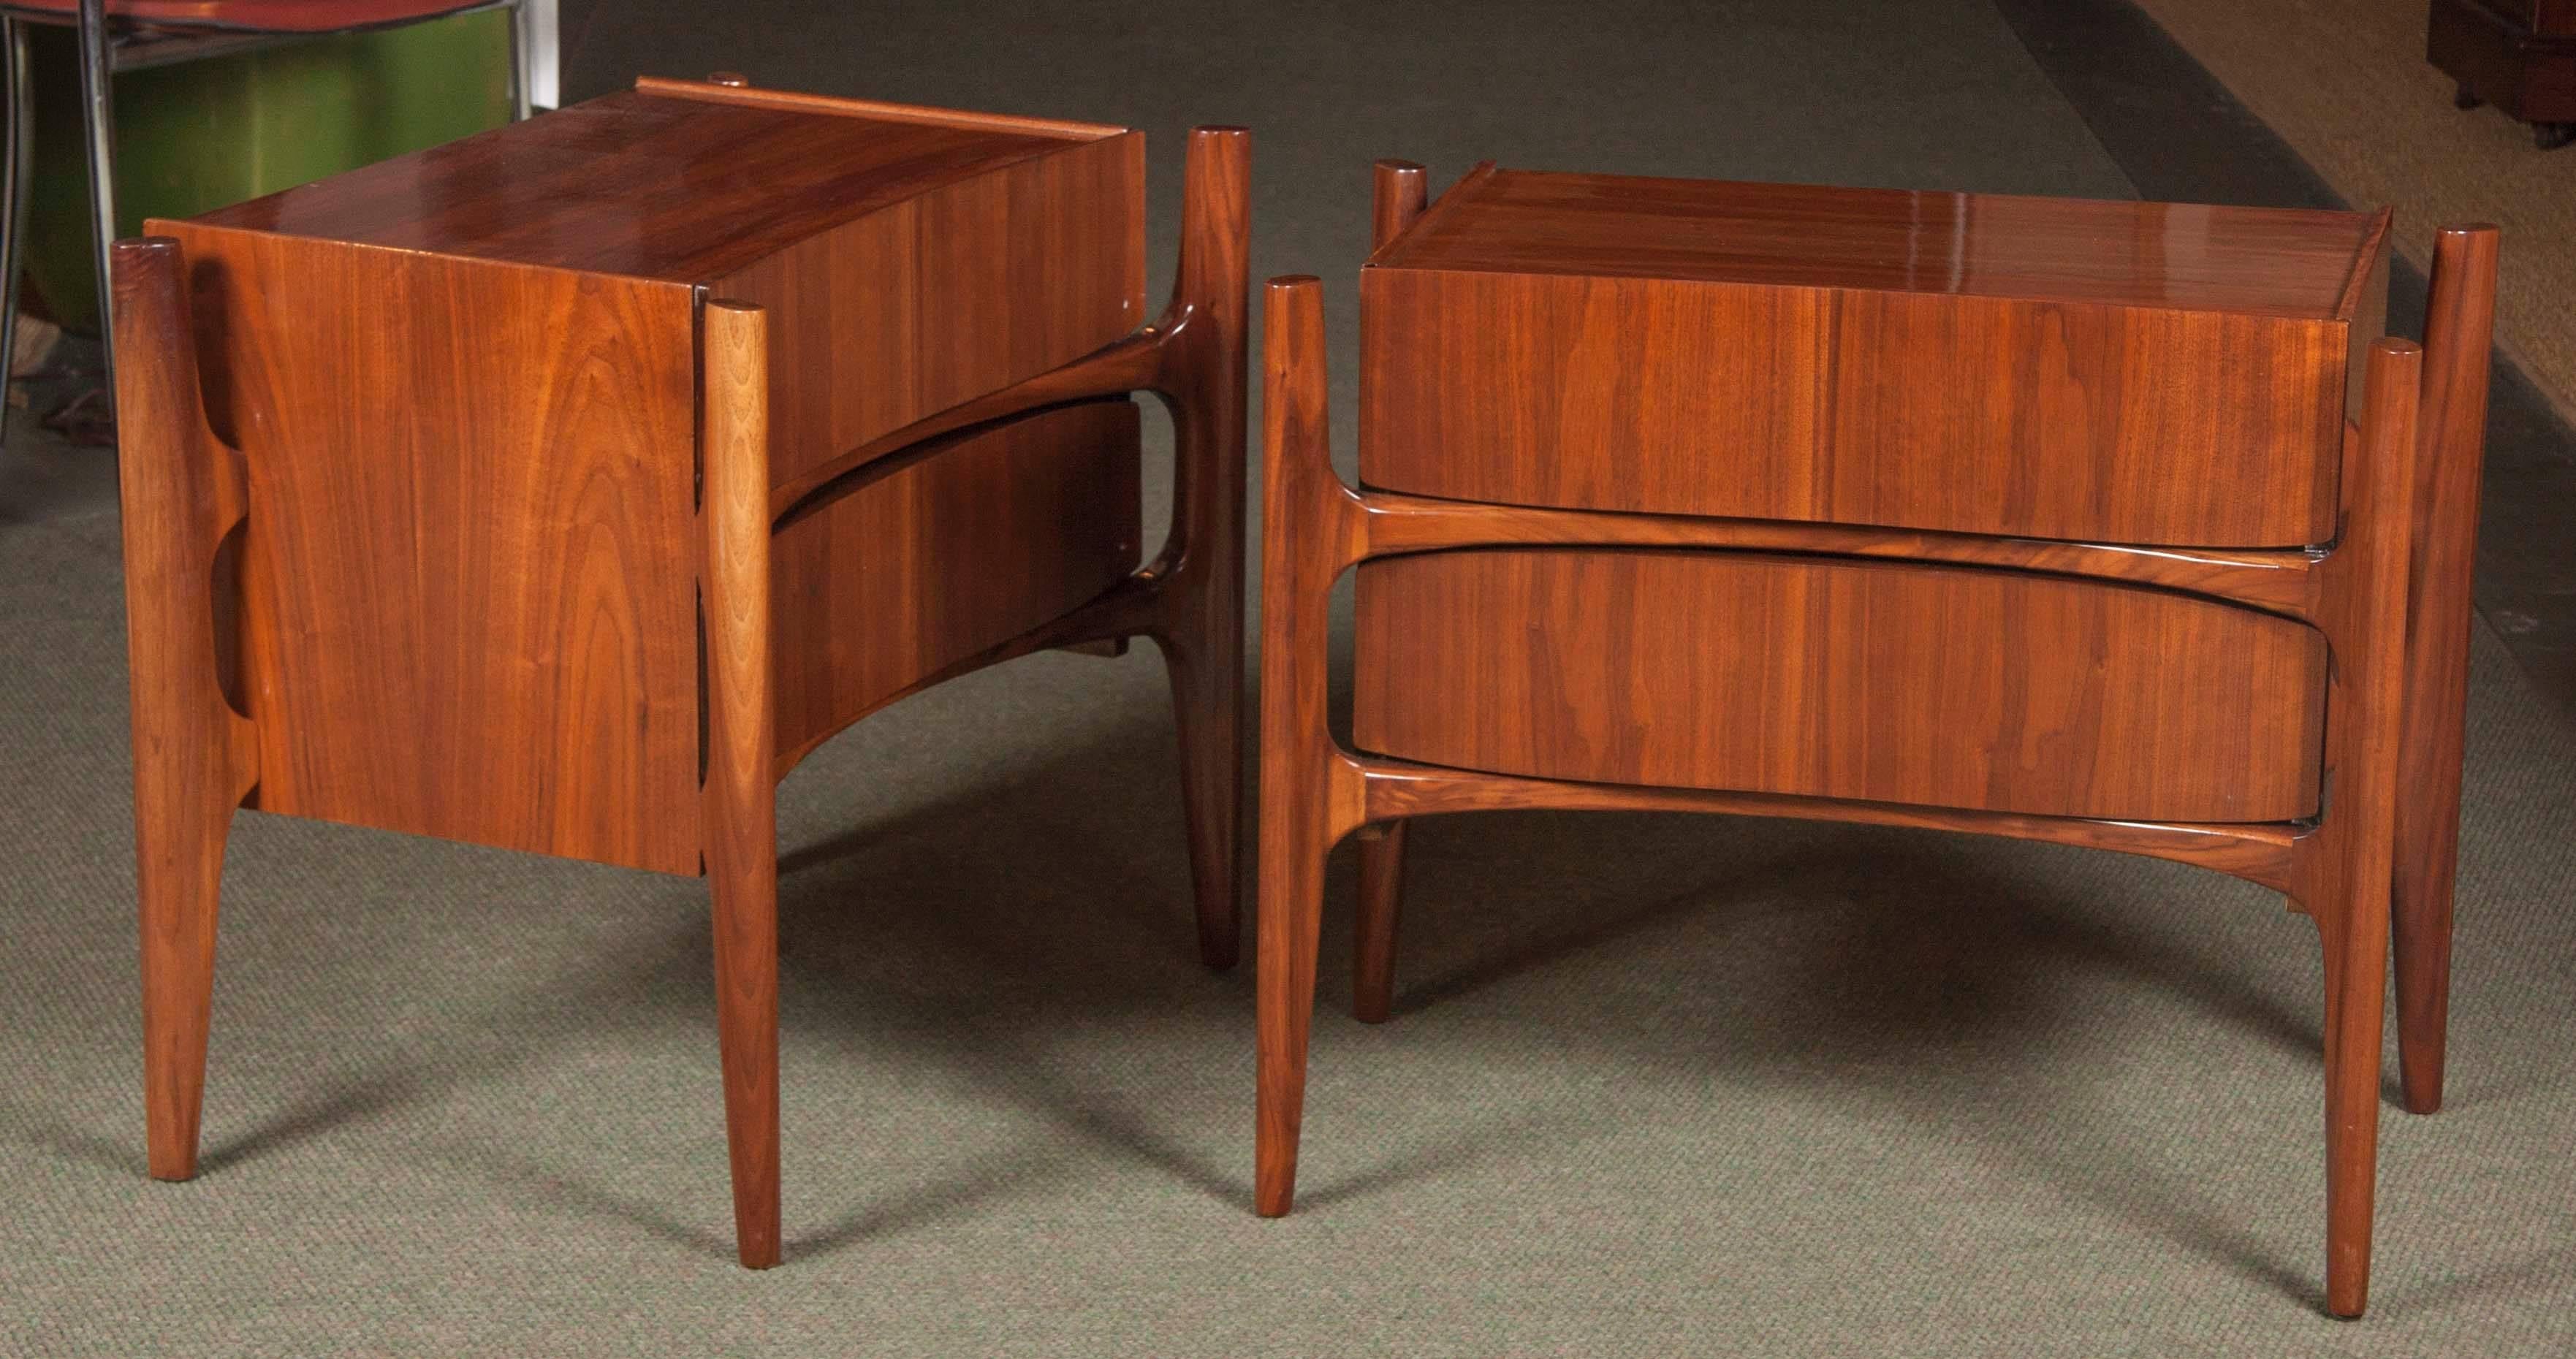 A pair of walnut bedside tables designed by Edmond Spence. Marked Swedish. Produced in Sweden by the Swedish Furniture Guild.